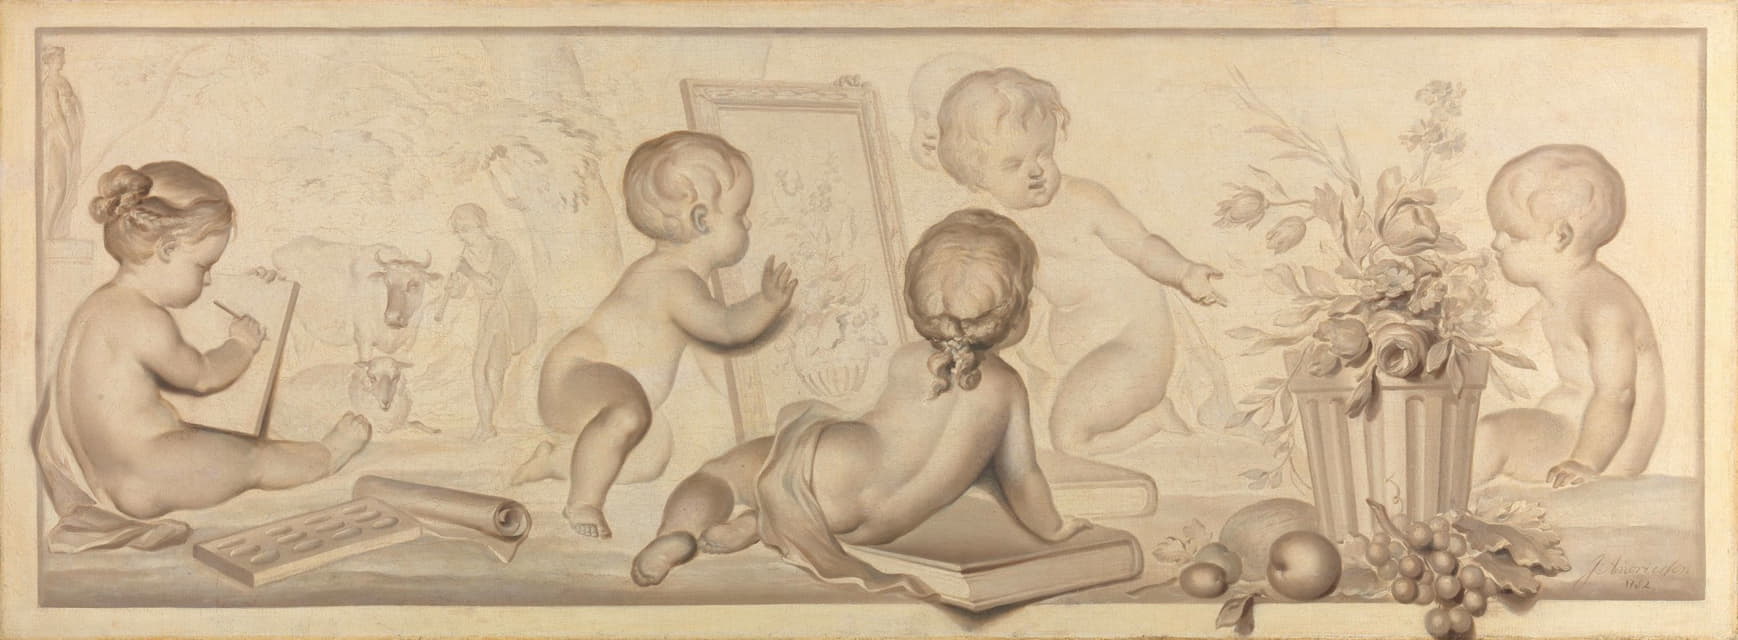 Jurriaan Andriessen - Six Putti with Flowers and Fruit and Attributes of the Art of Drawing